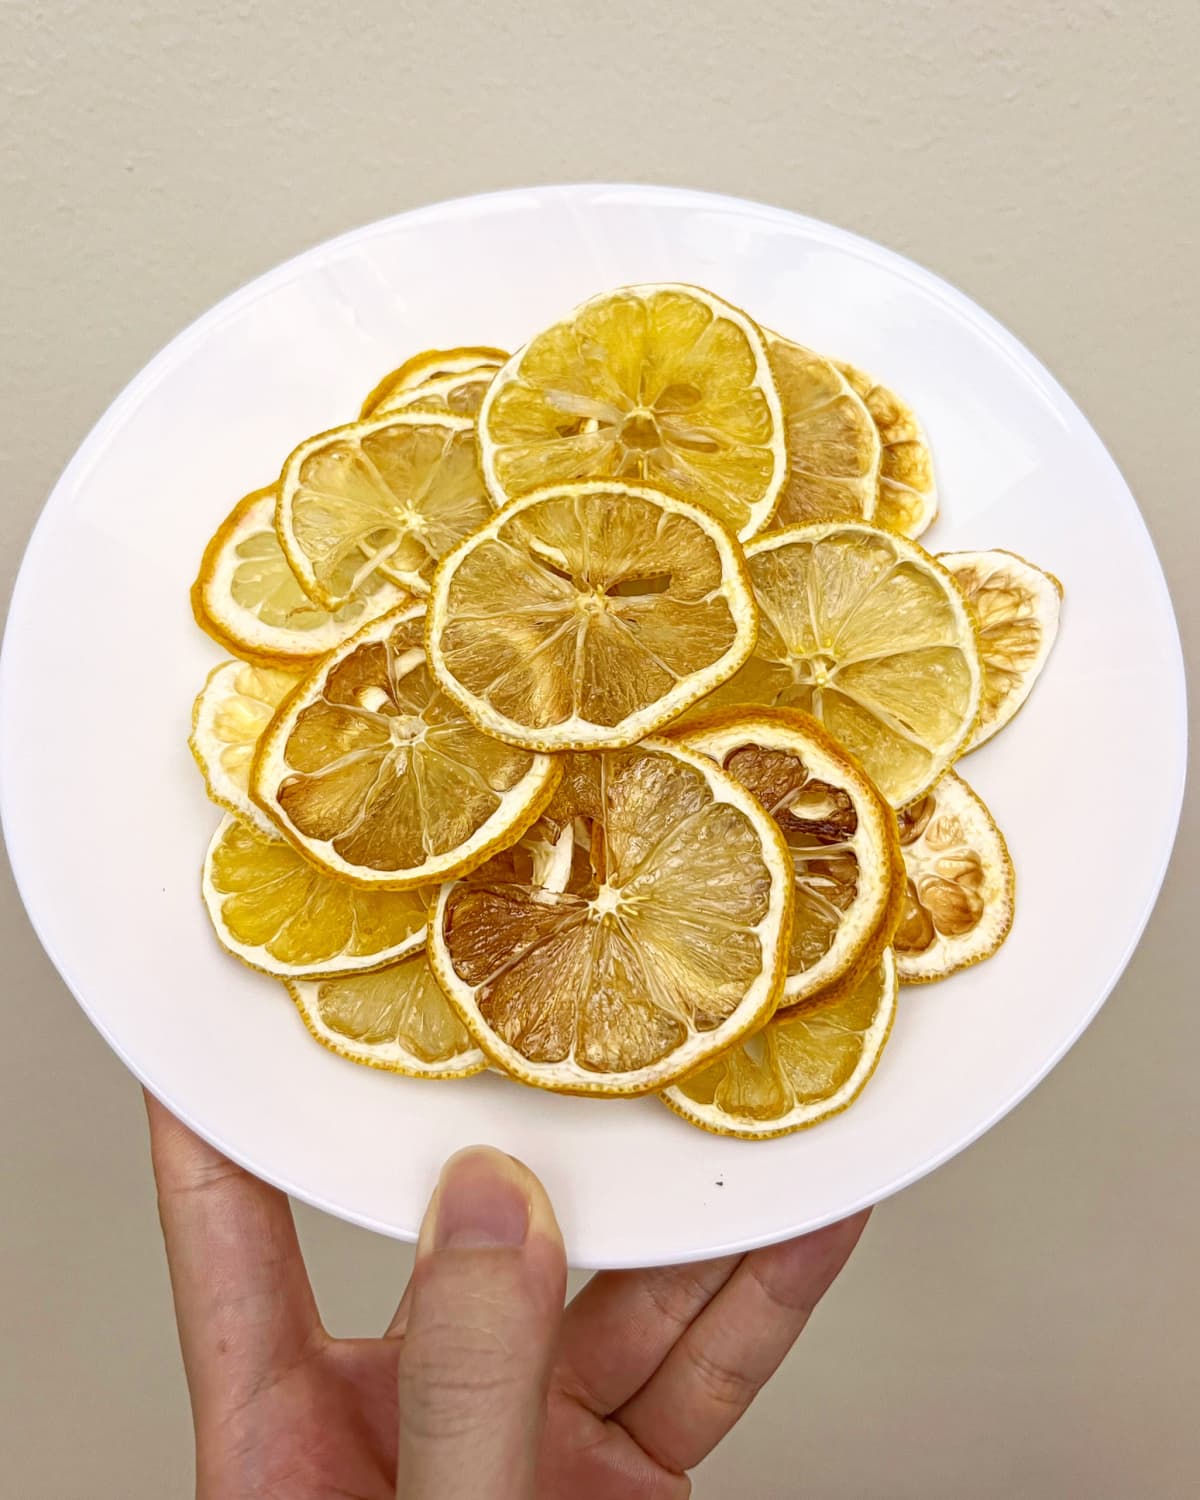 Cured lemon slices on a white plate